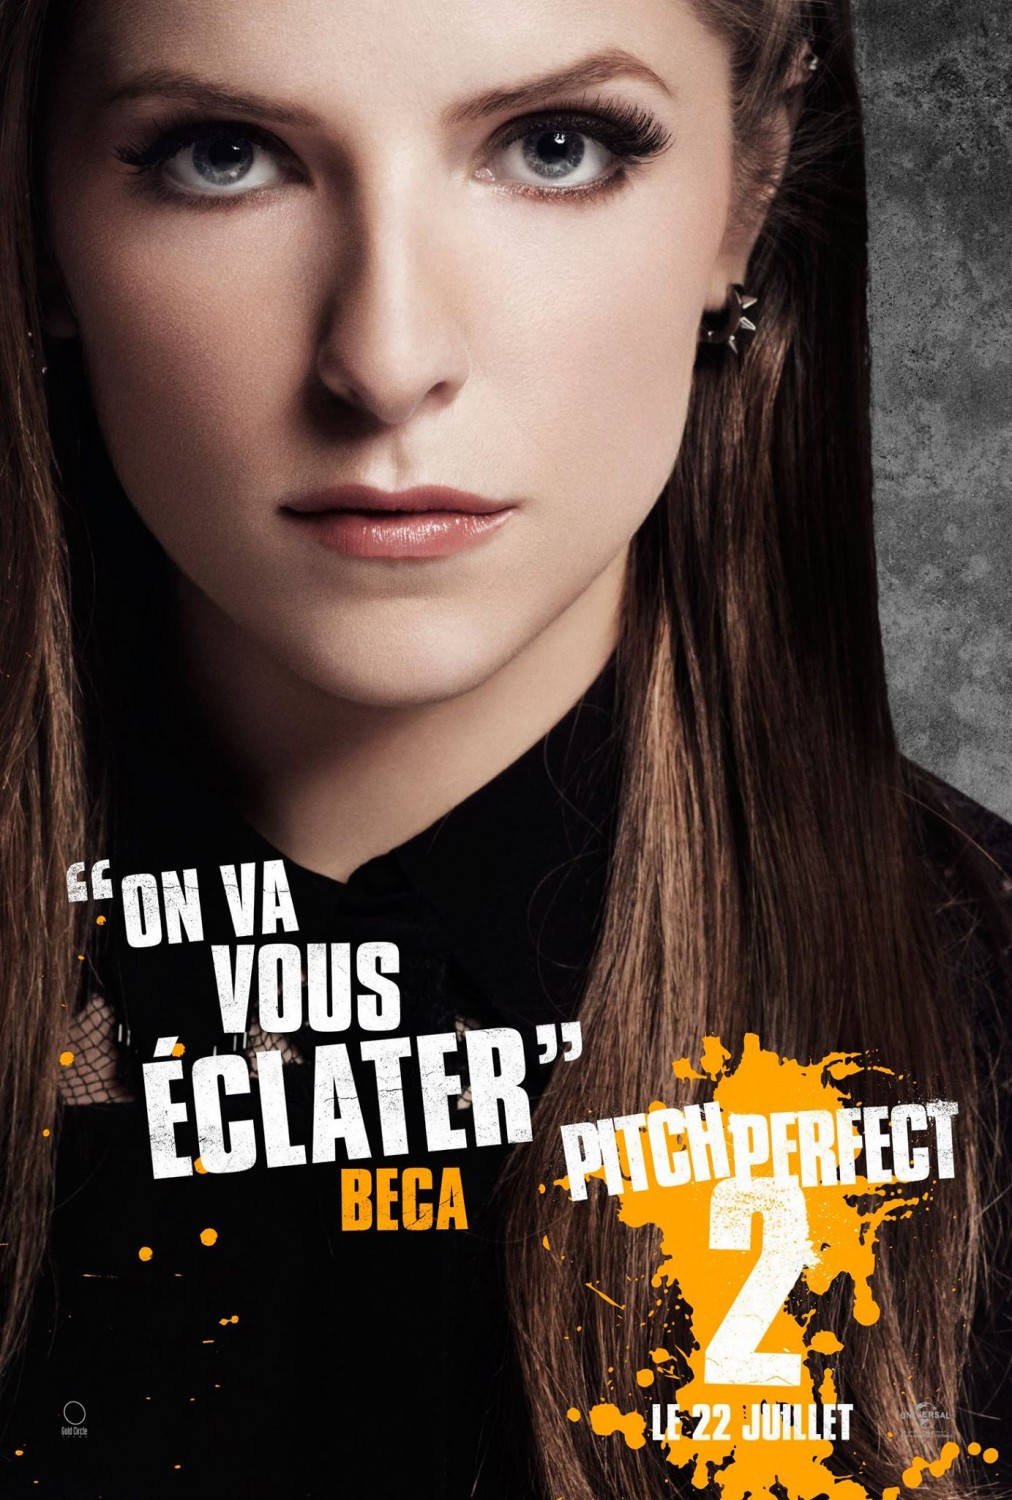 Extra Large Movie Poster Image for Pitch Perfect 2 (#14 of 15)